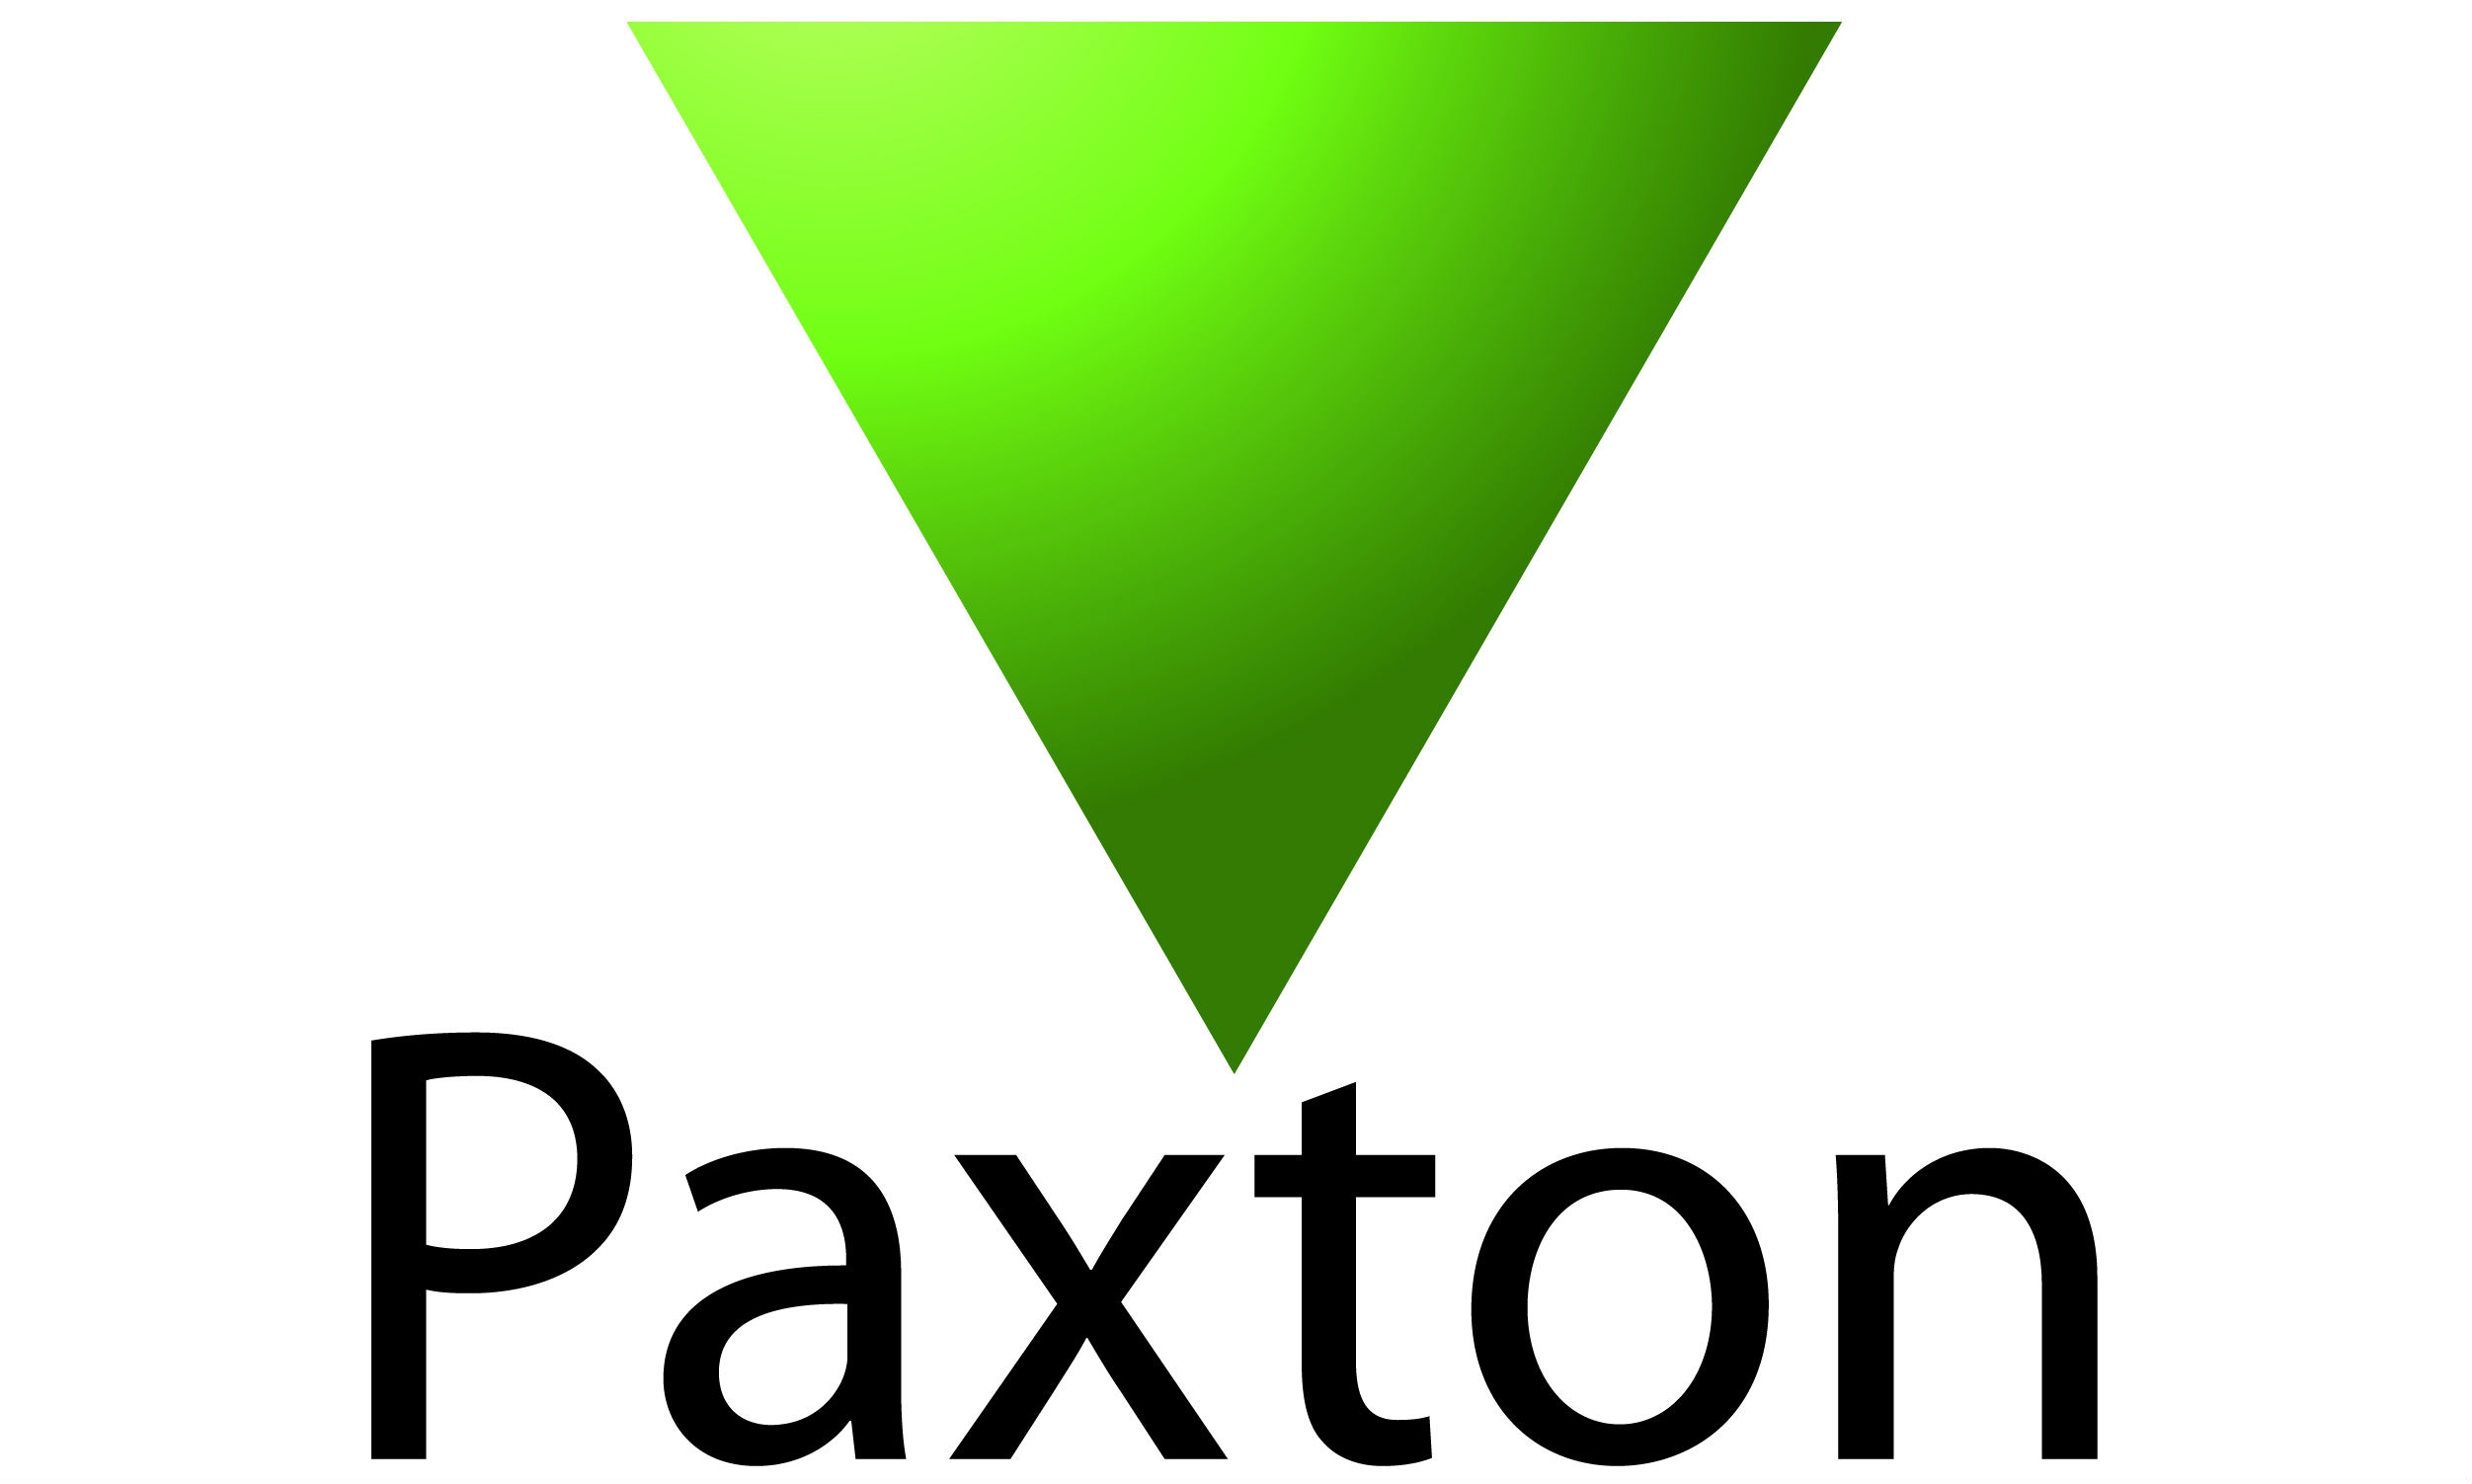 Paxton Net2 Access Control Integrates with Hikvision Video Integration Platform